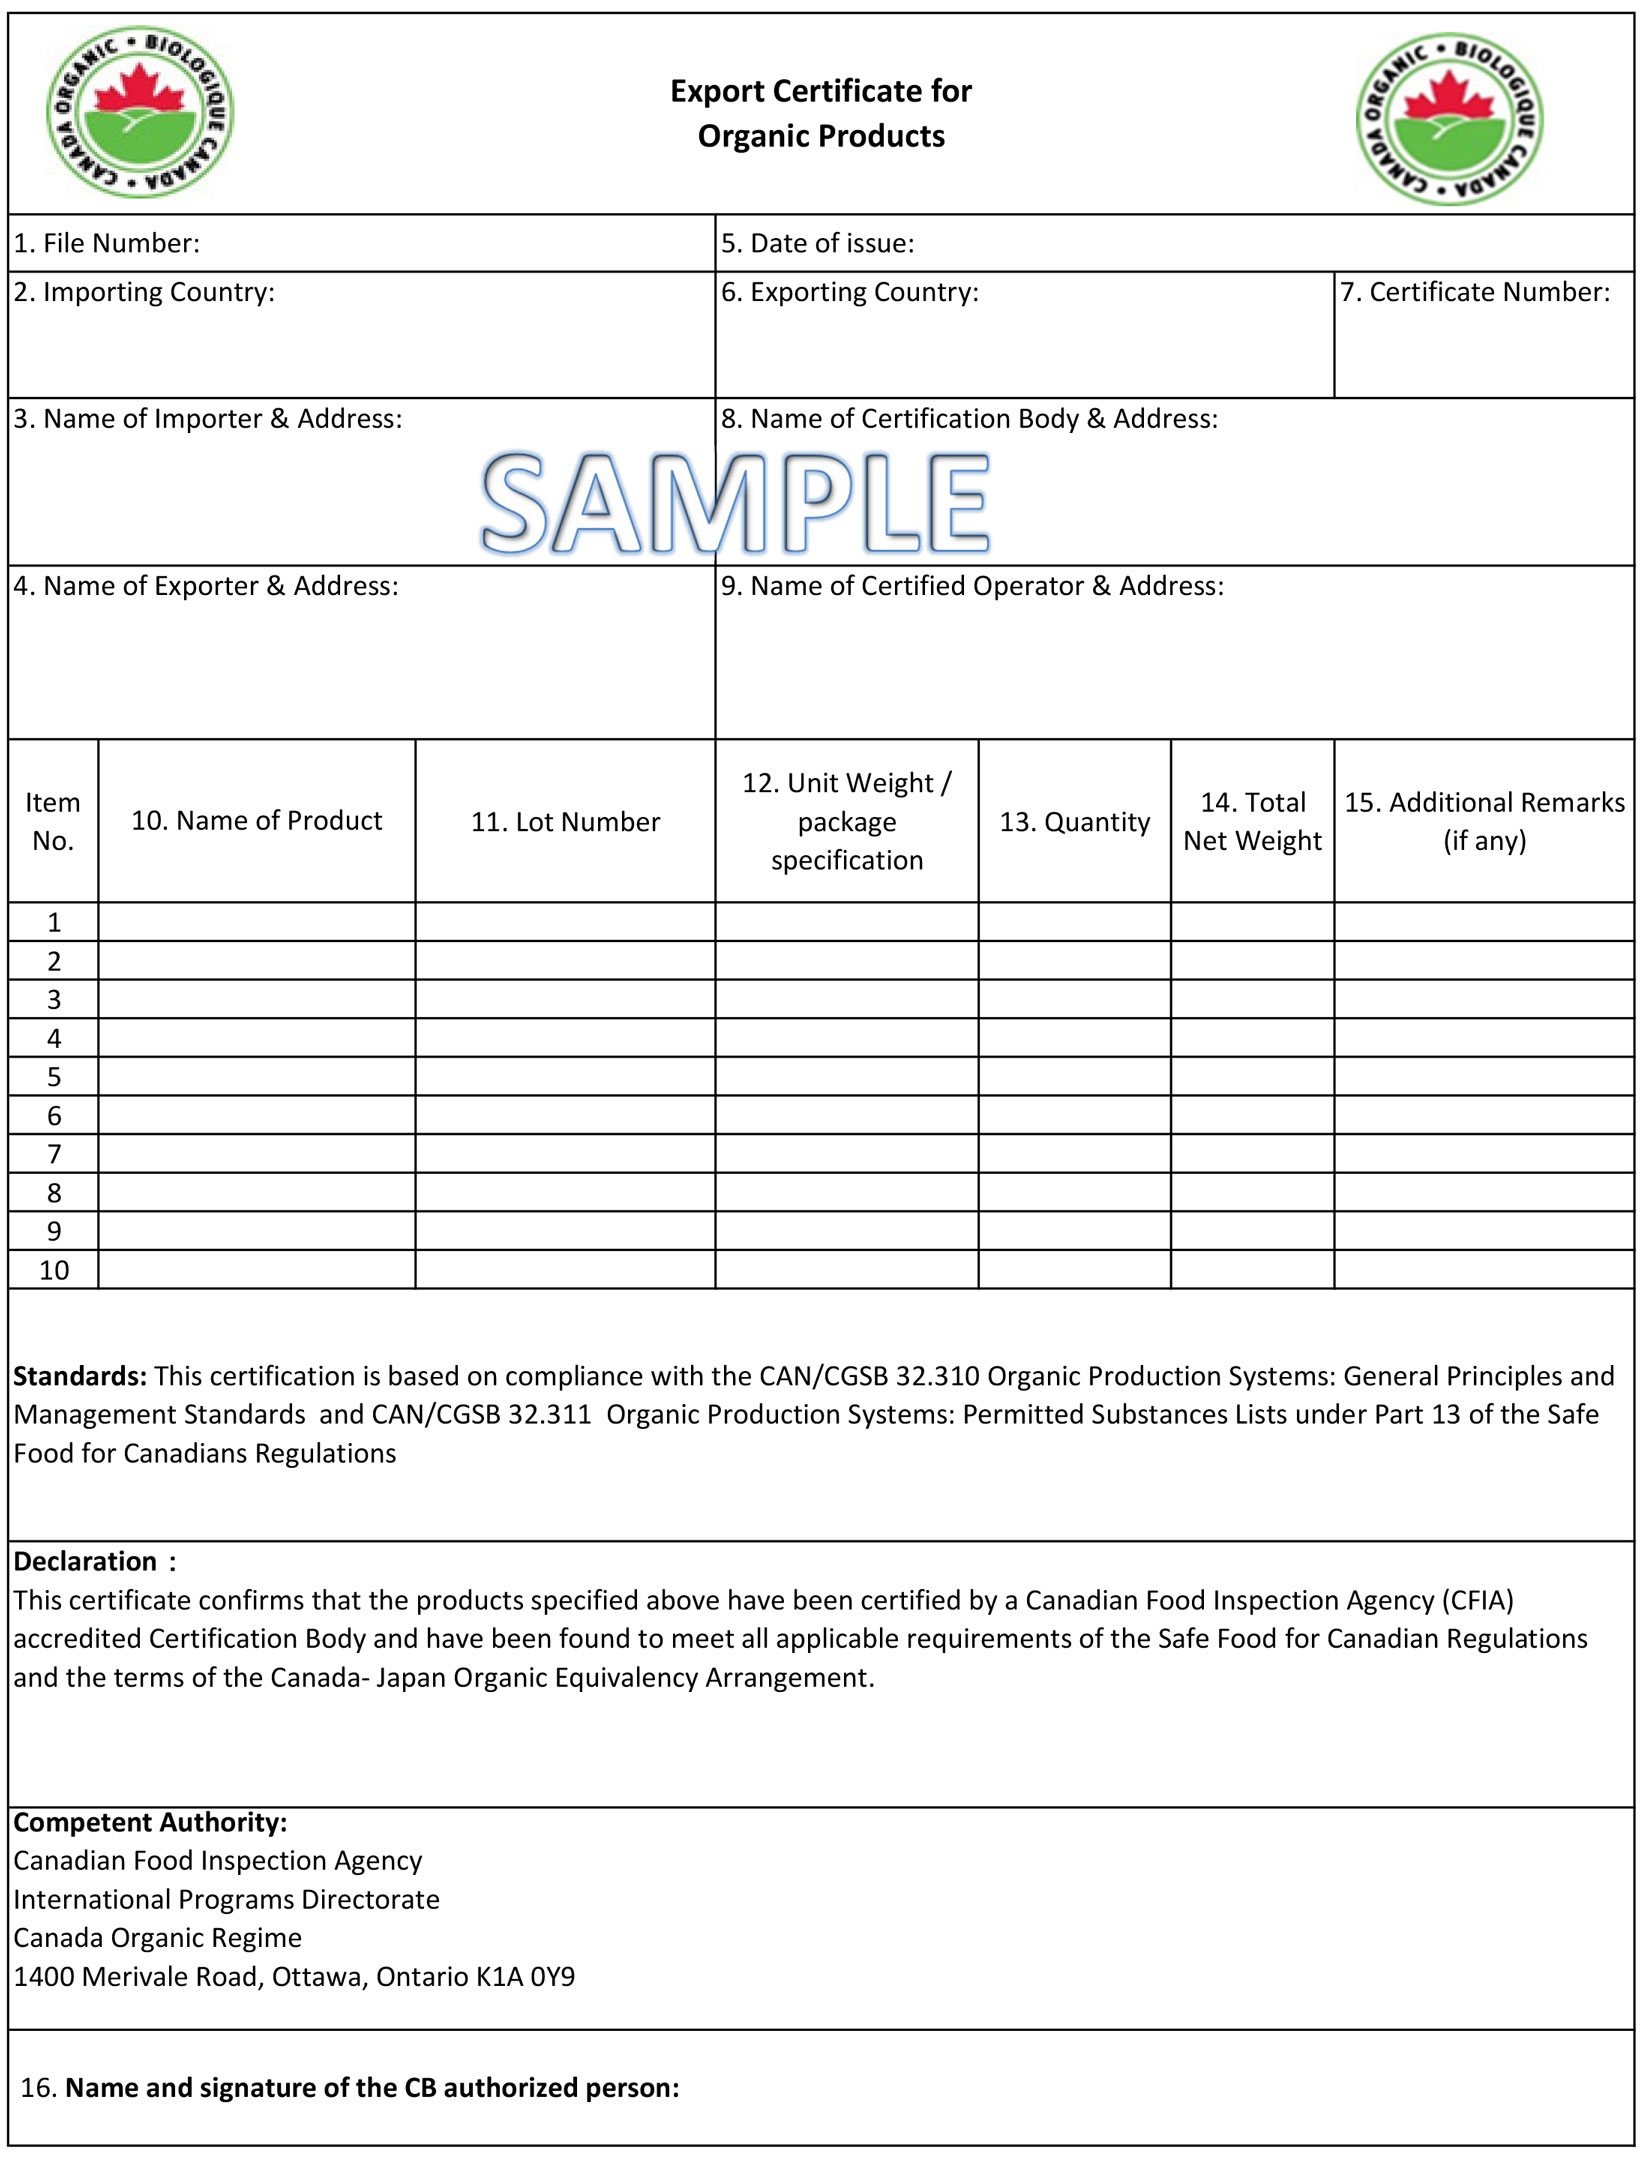 Export Certificate for Organic Products - description follows